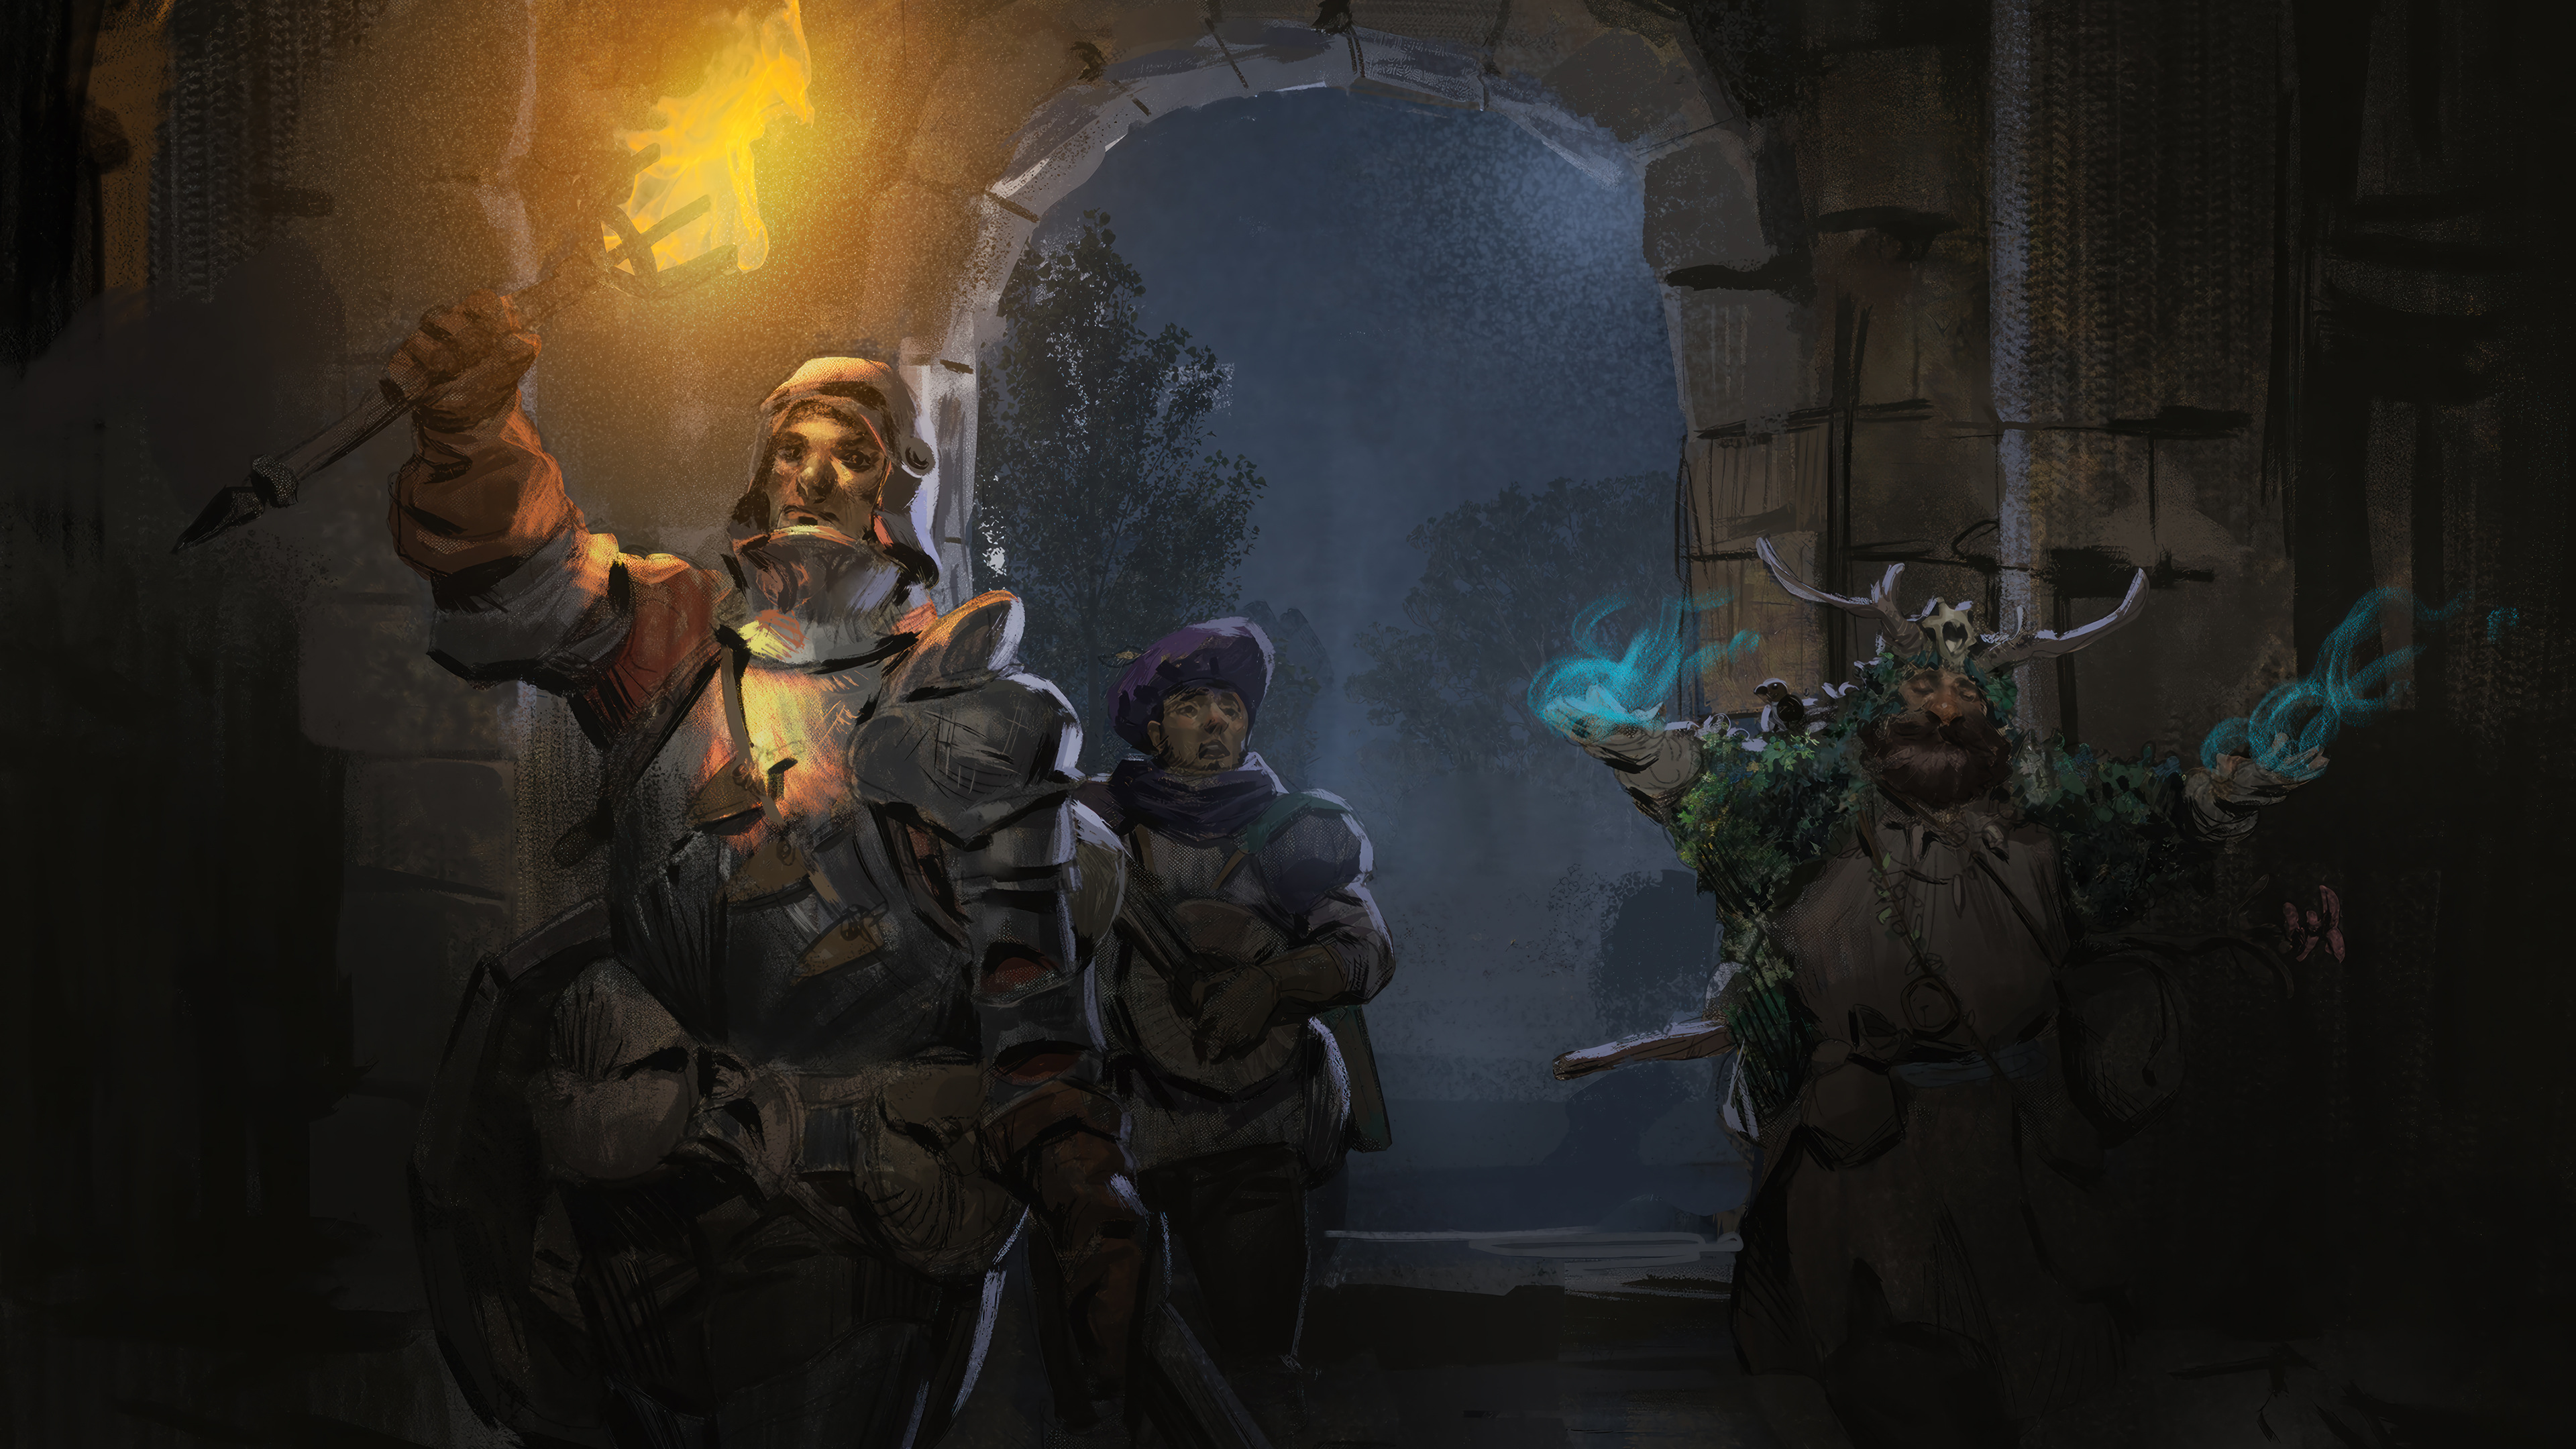 HD wallpaper featuring adventurers from Dark and Darker exploring a shadowy dungeon, with a mystical glowing light enhancing the eerie atmosphere.